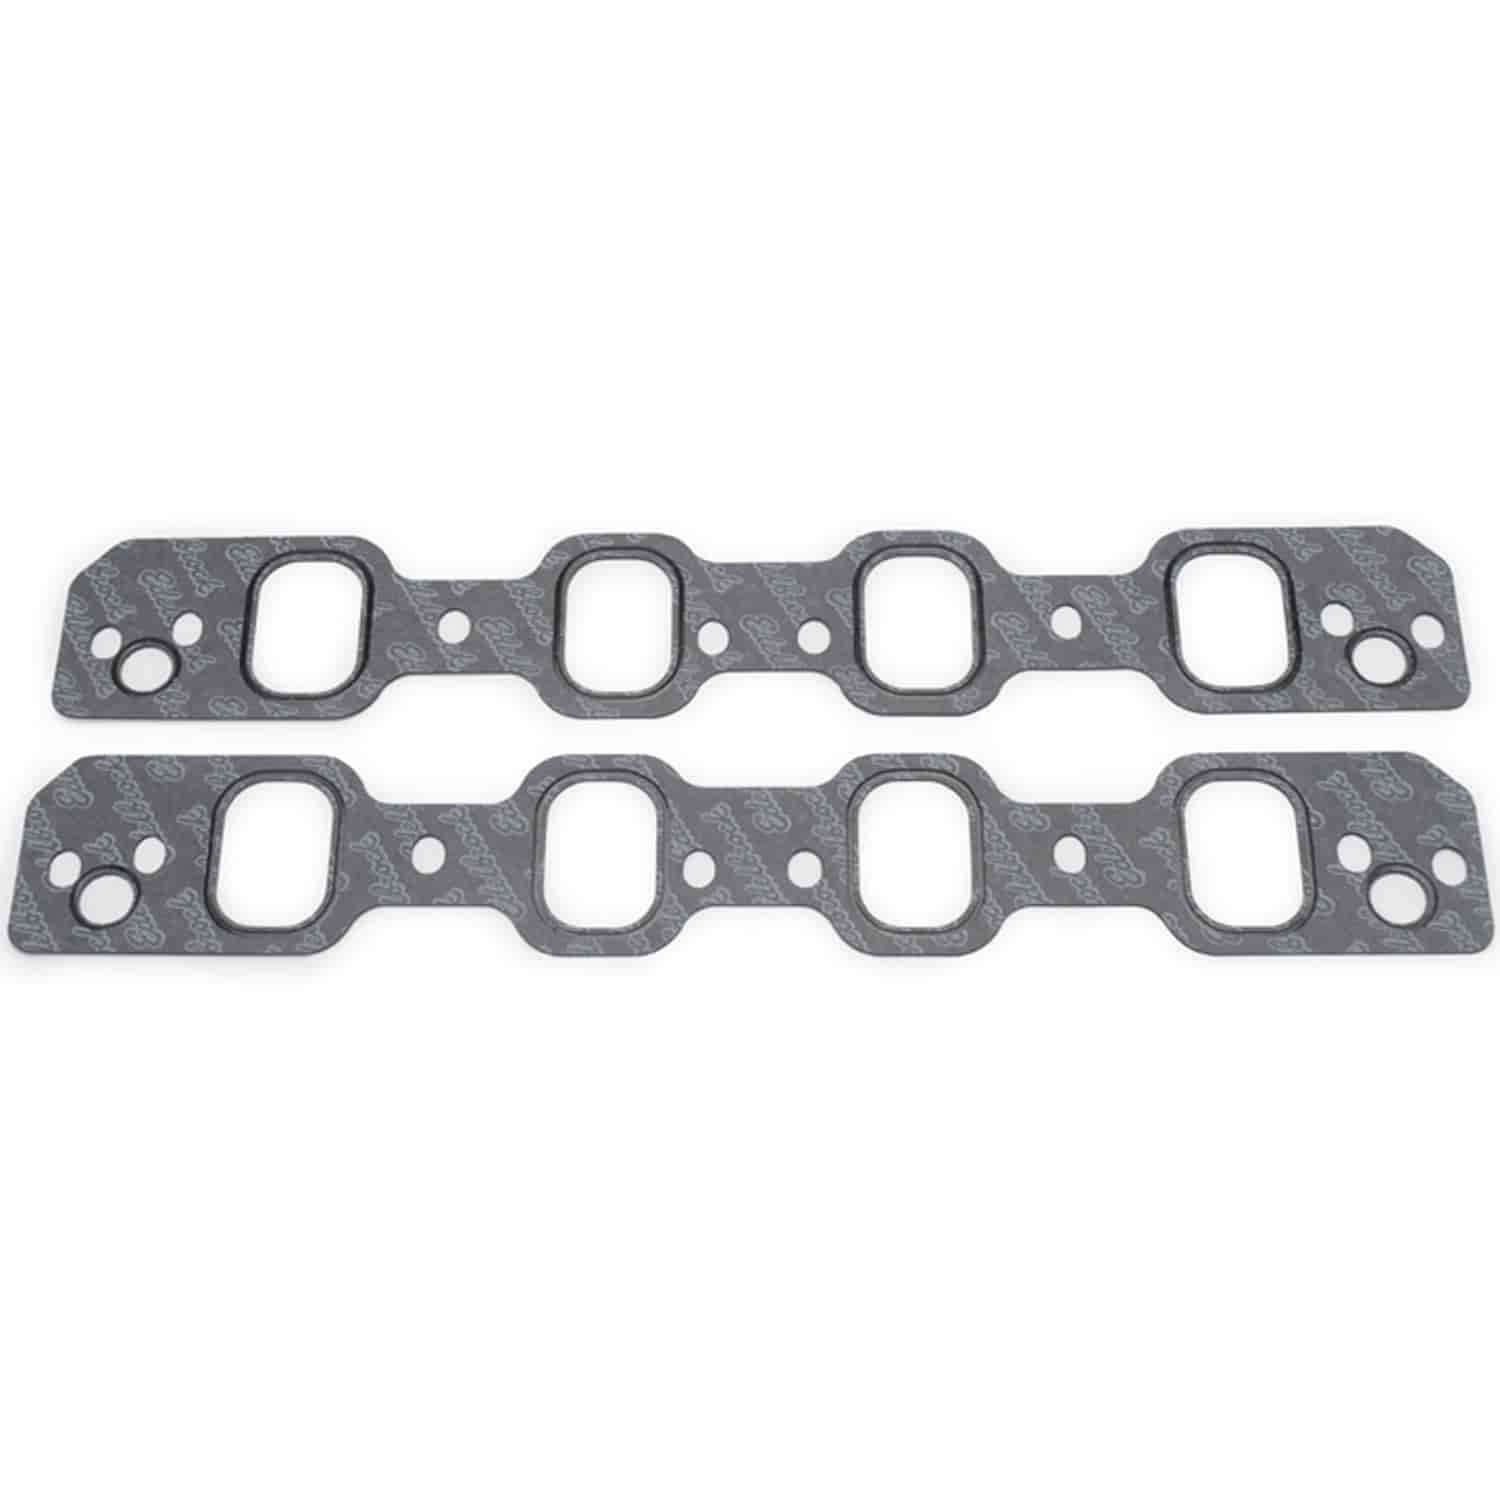 Intake Gaskets for Ford 351C Cleveland and Clevor